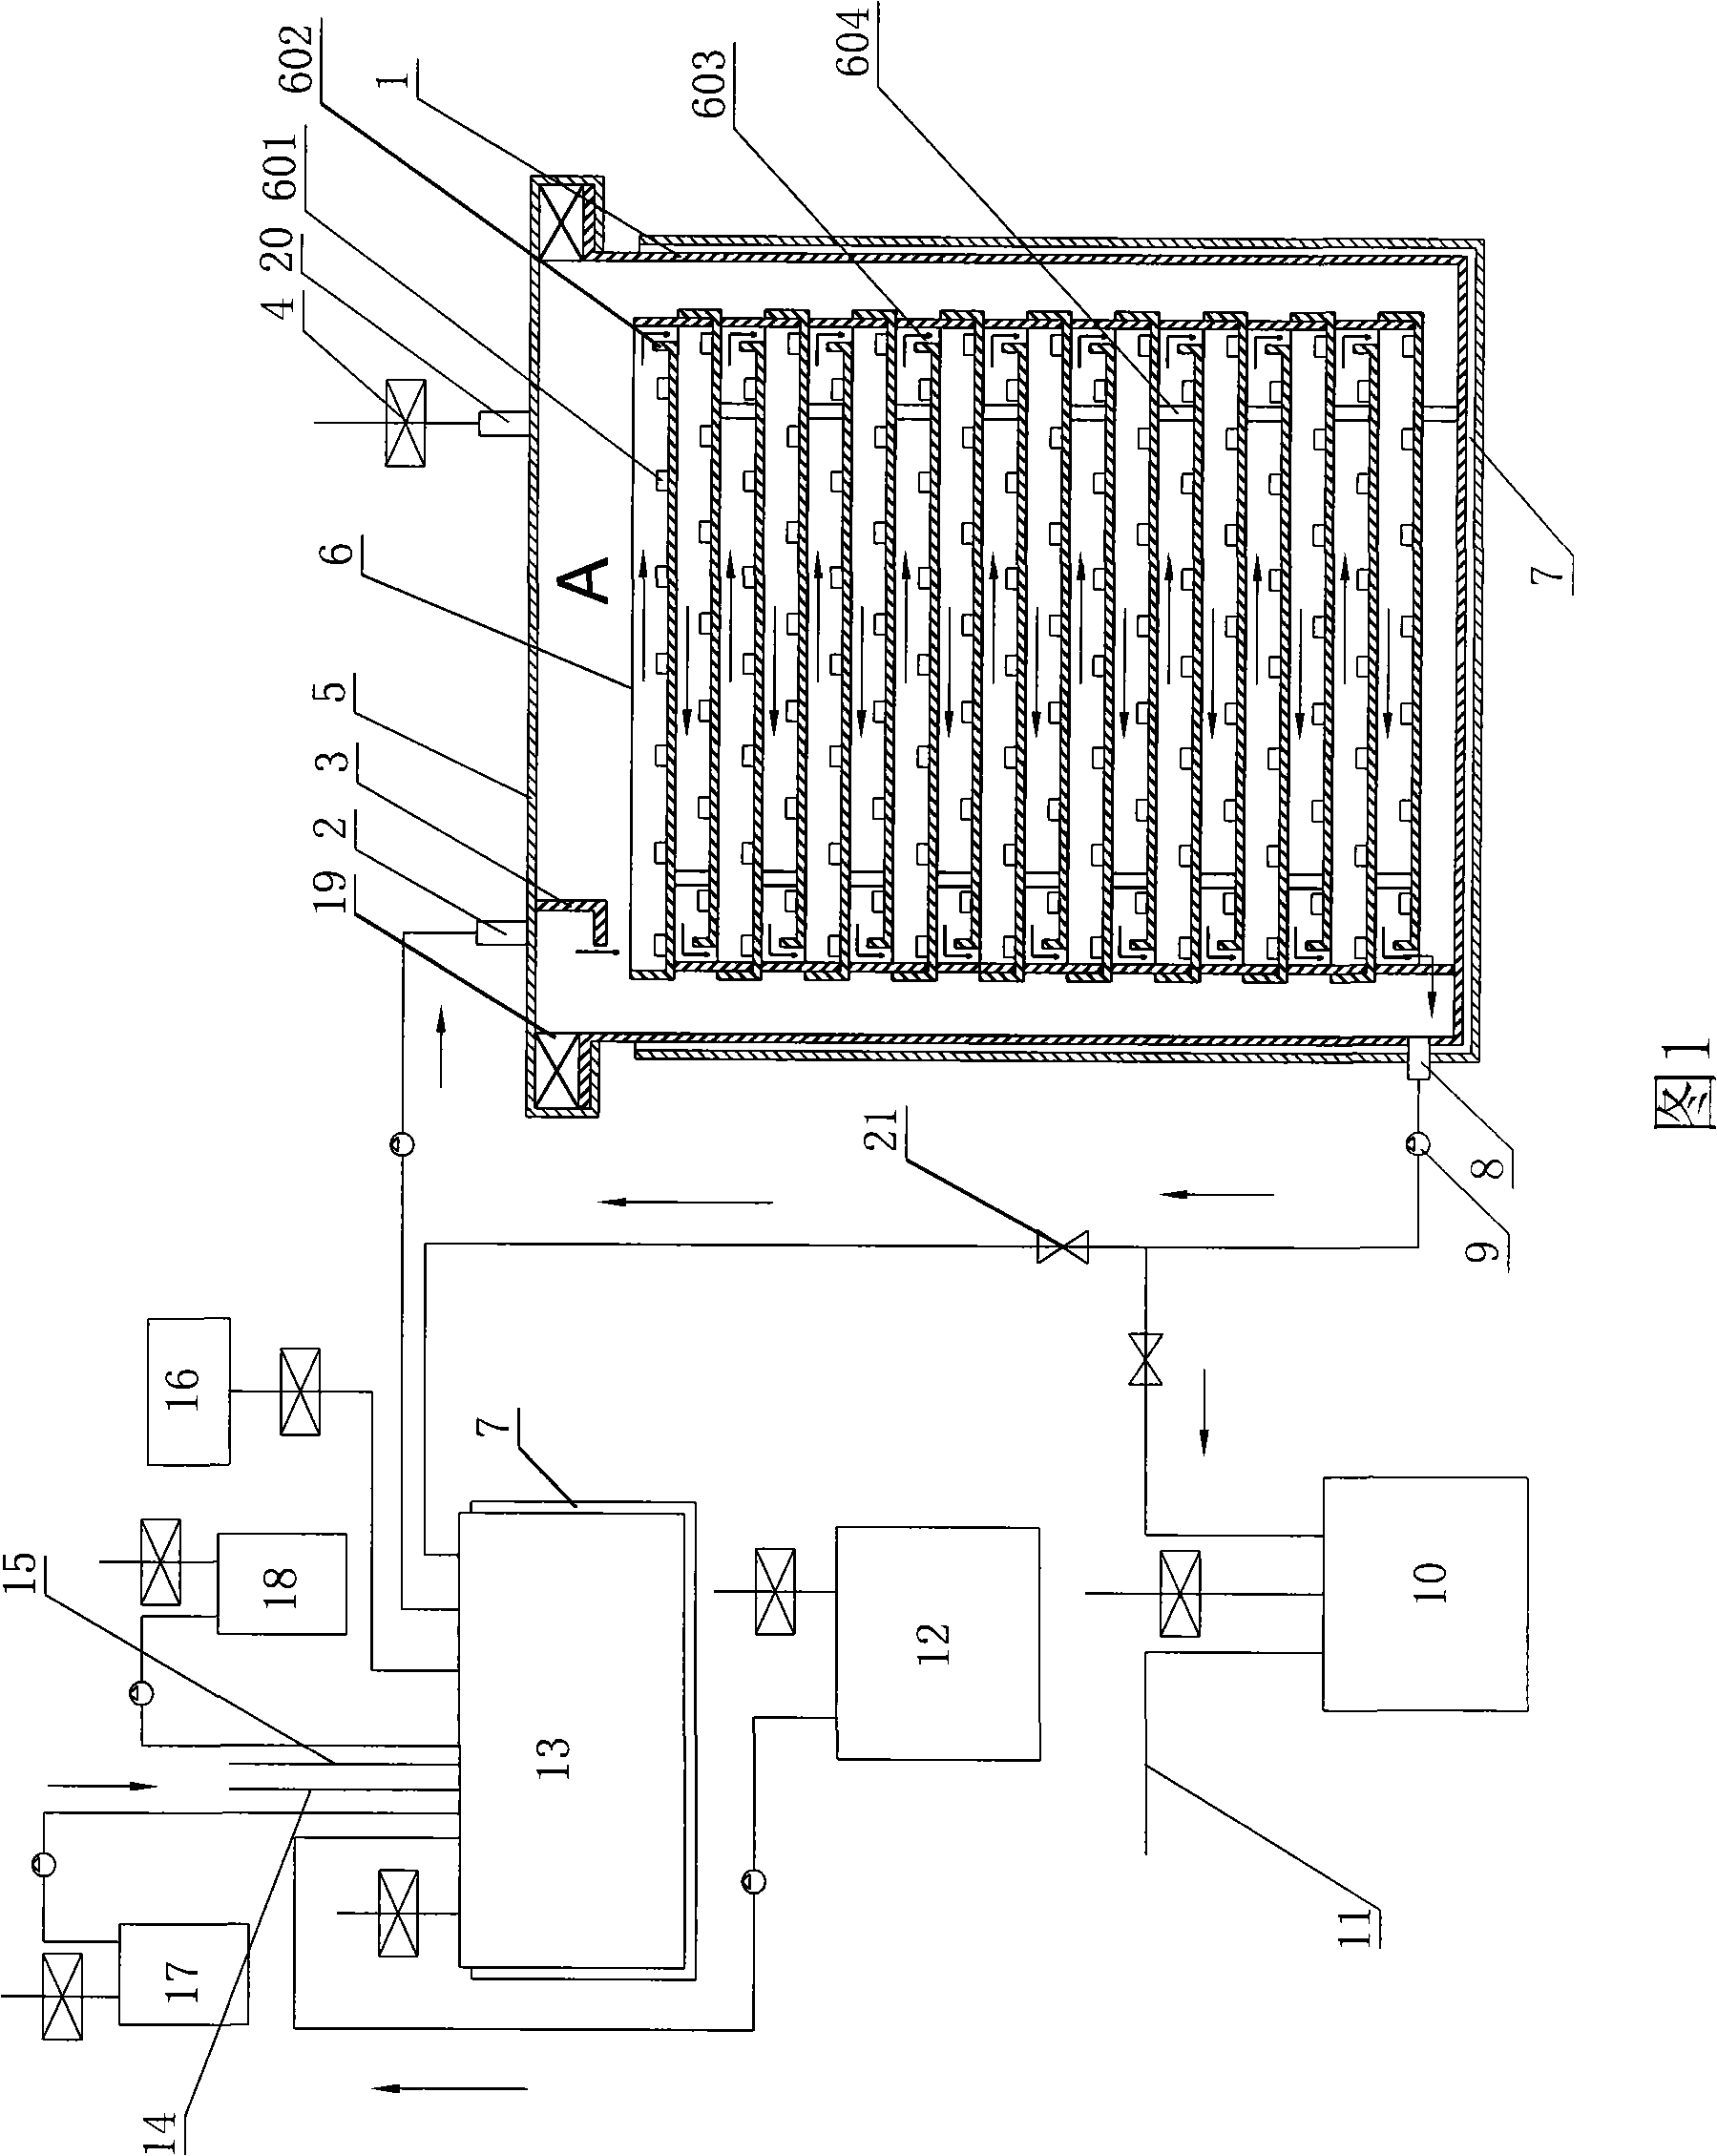 Bioreactor for producing tissue engineering products